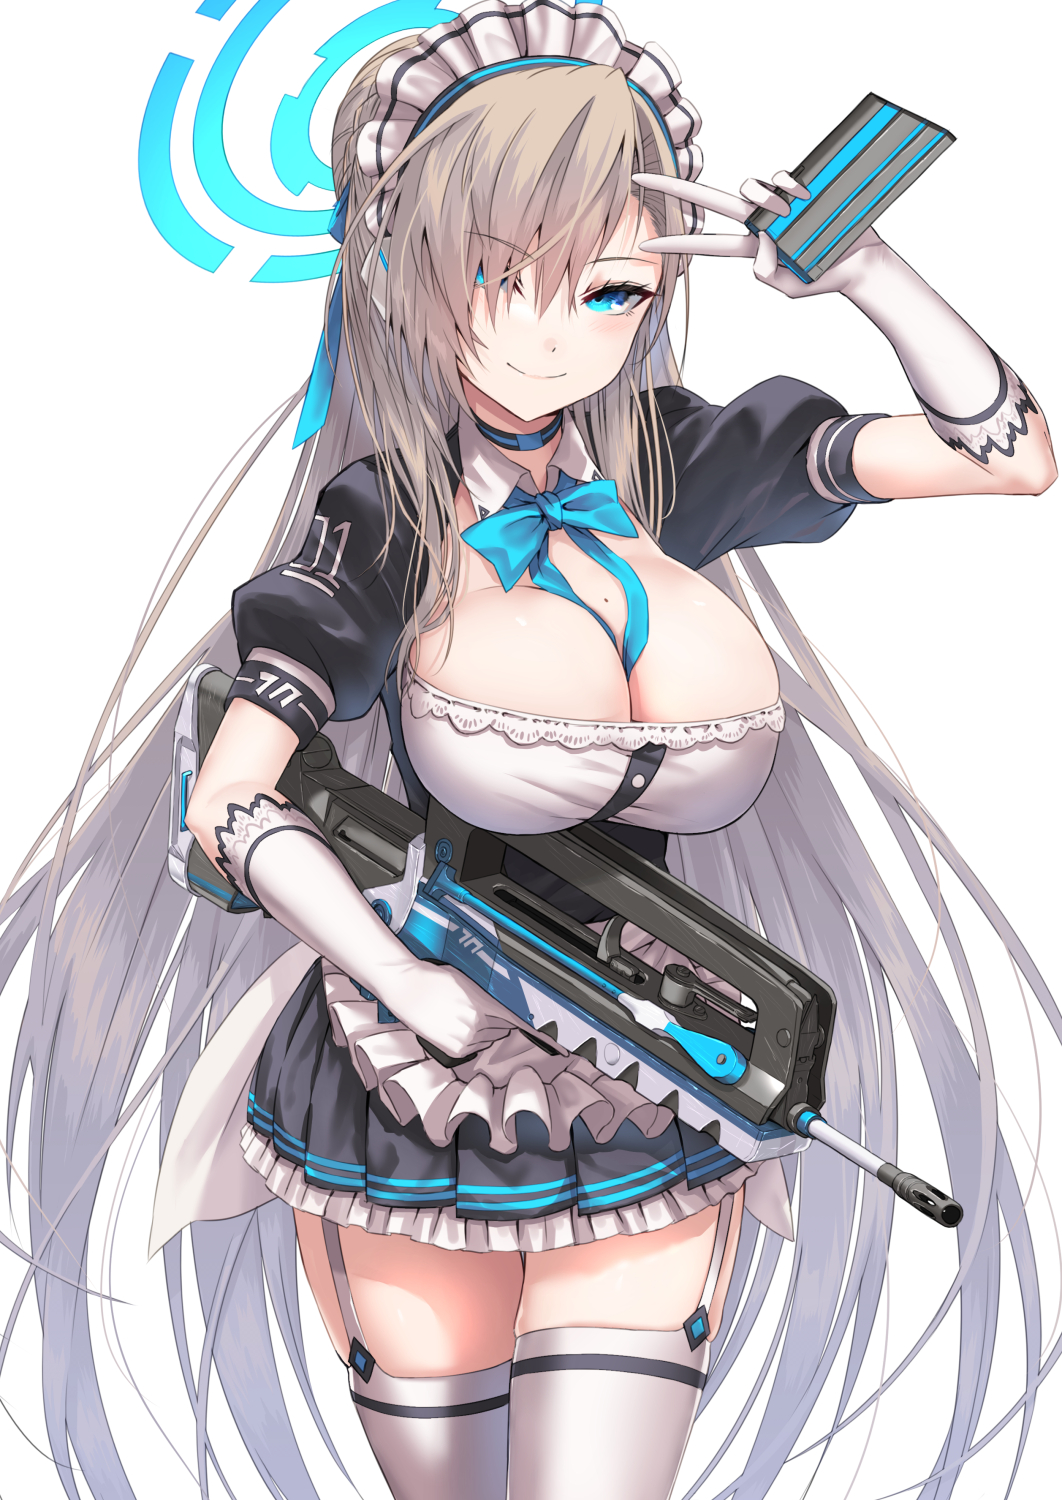 Anime 1062x1500 anime anime girls big boobs thighs Asuna Ichinose Blue Archive gun girls with guns peace sign long hair bow tie smiling gloves moles mole on breast stockings portrait display